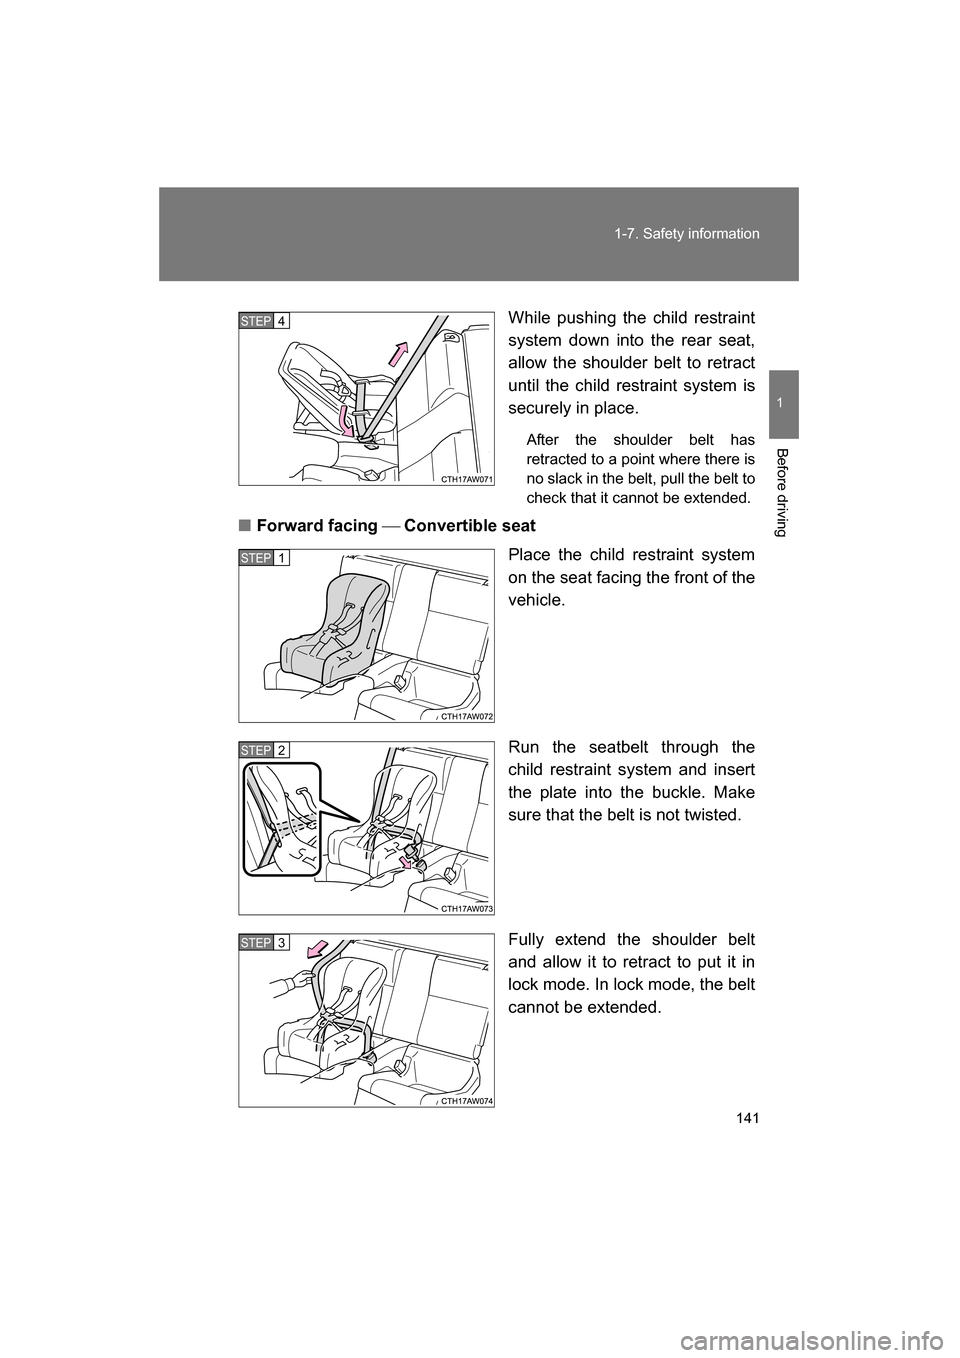 SUBARU BRZ 2015 1.G Owners Manual 141
1-7. Safety information
1
Before driving
While pushing the child restraint 
system down into the rear seat, 
allow the shoulder belt to retract 
until the child restraint system is
securely in pla